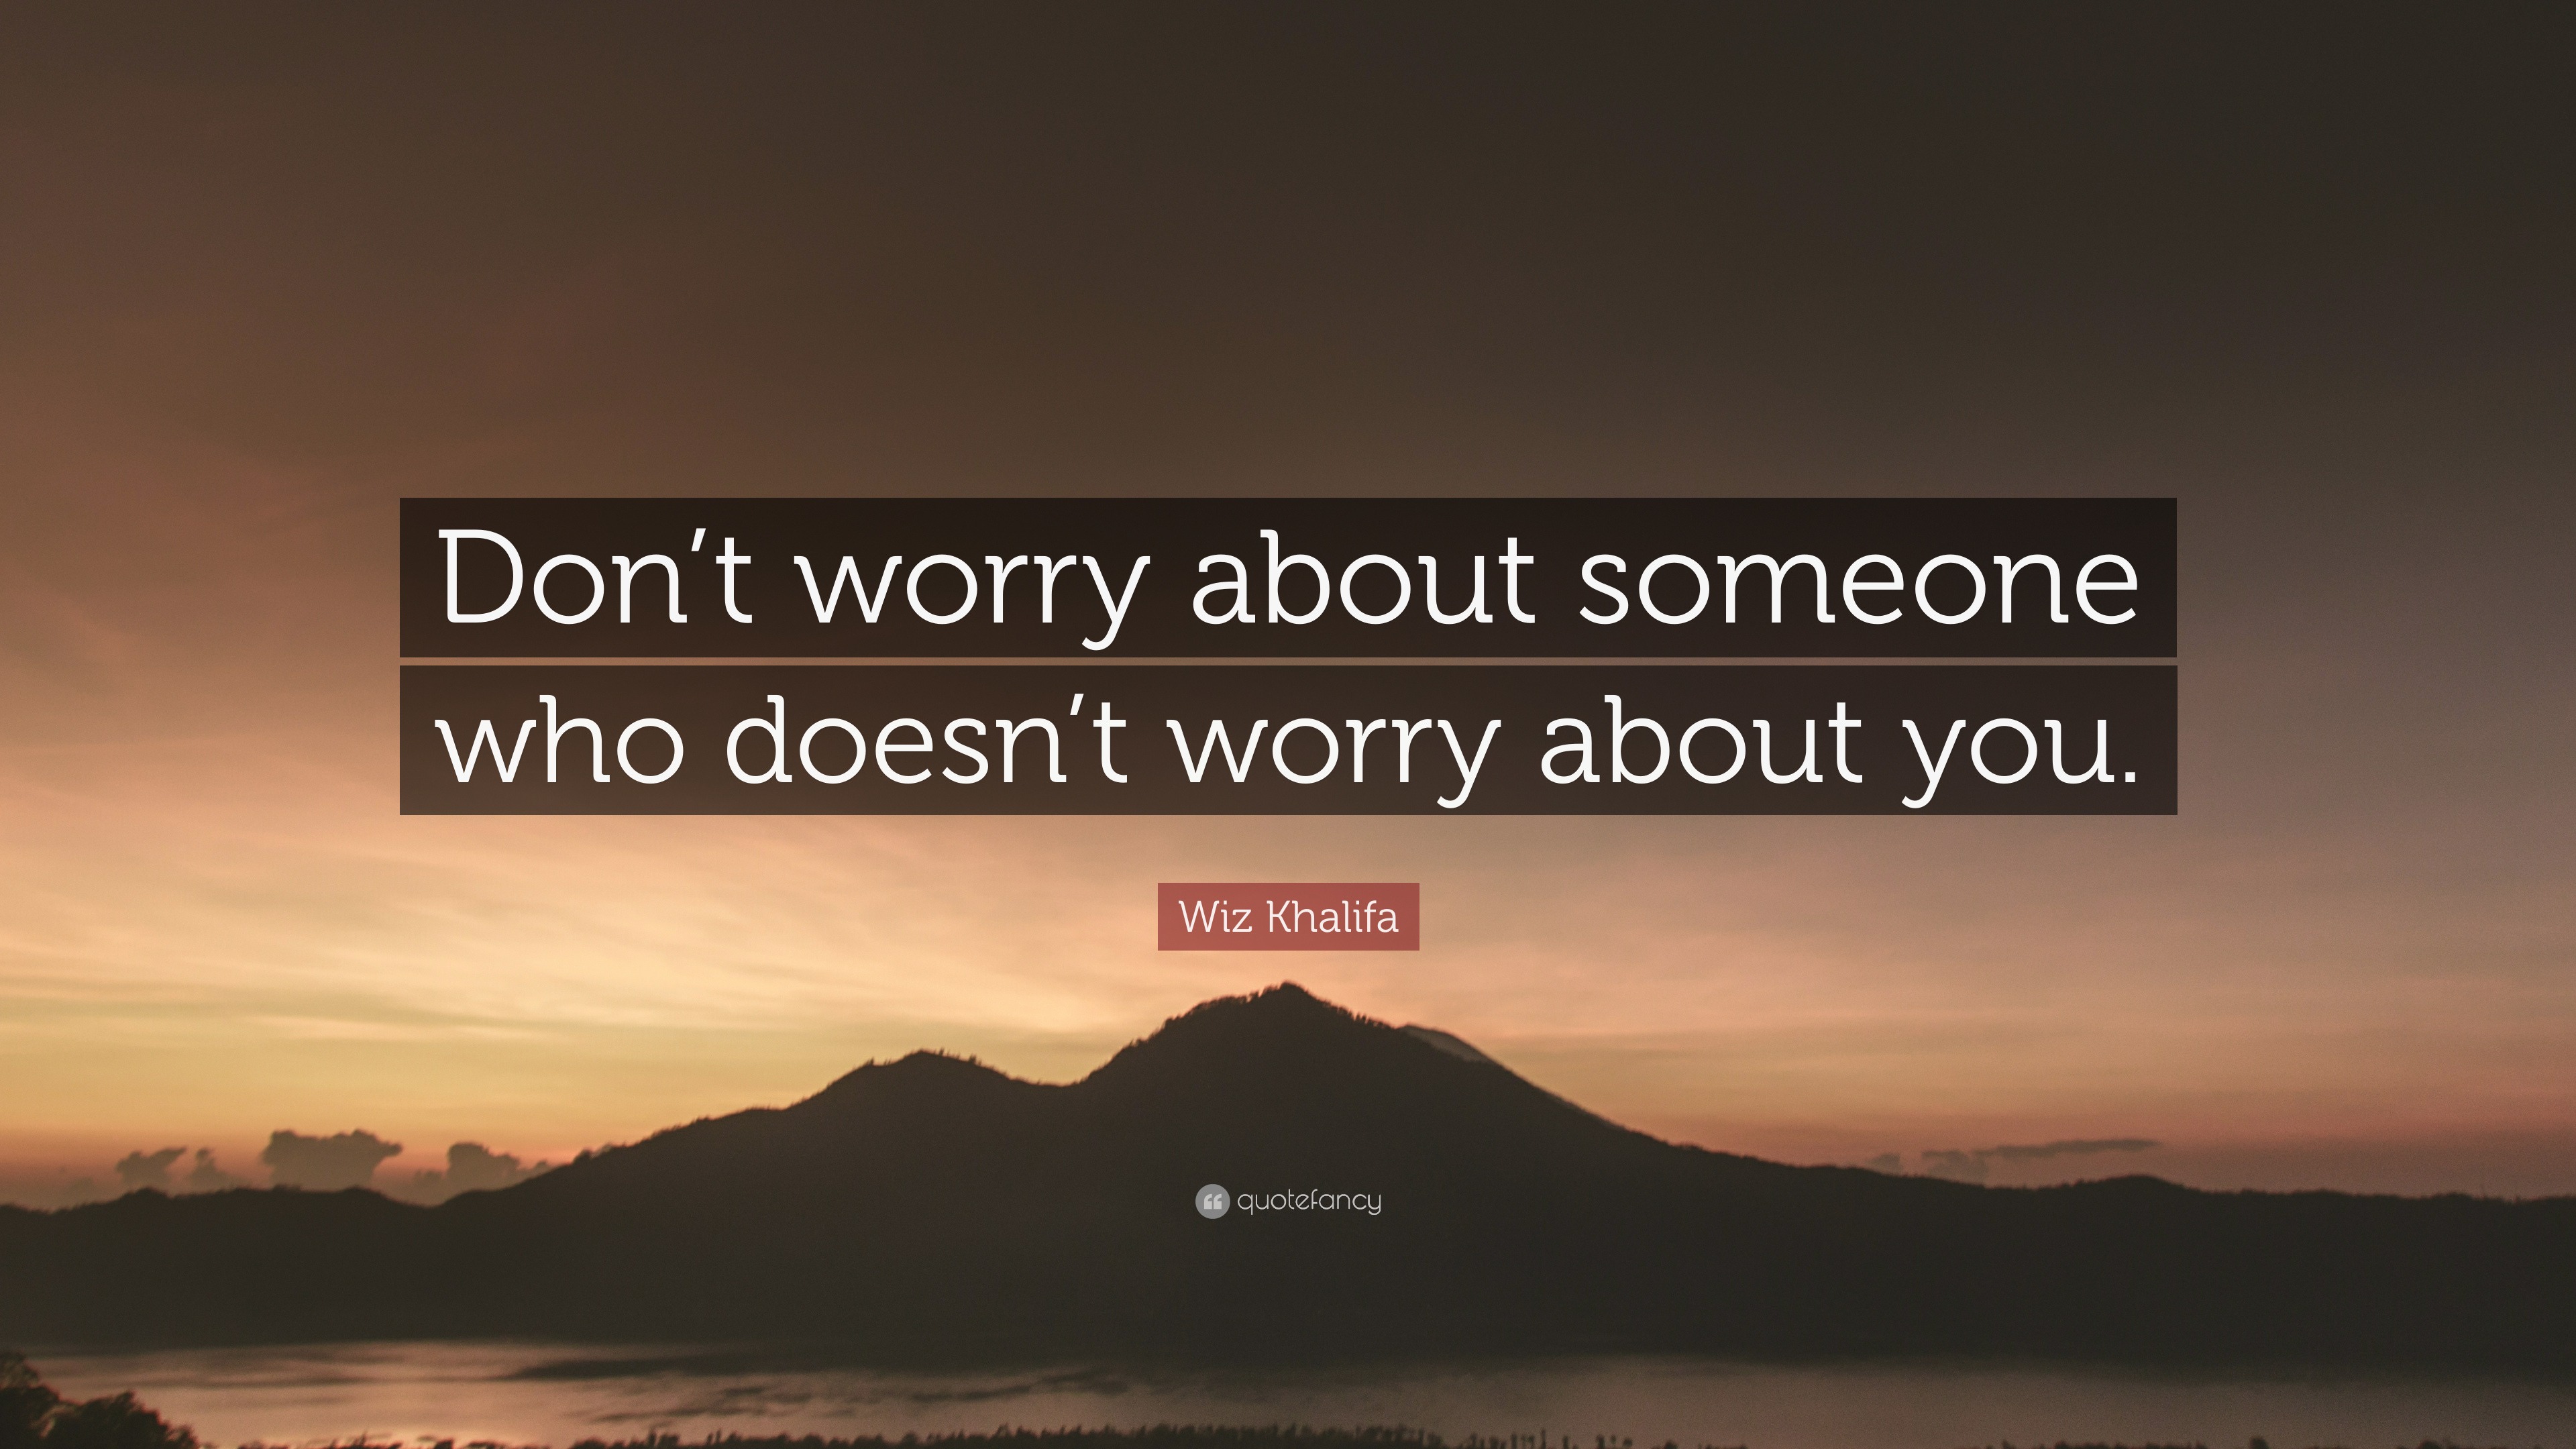 Wiz Khalifa Quote “Don t worry about someone who doesn t worry